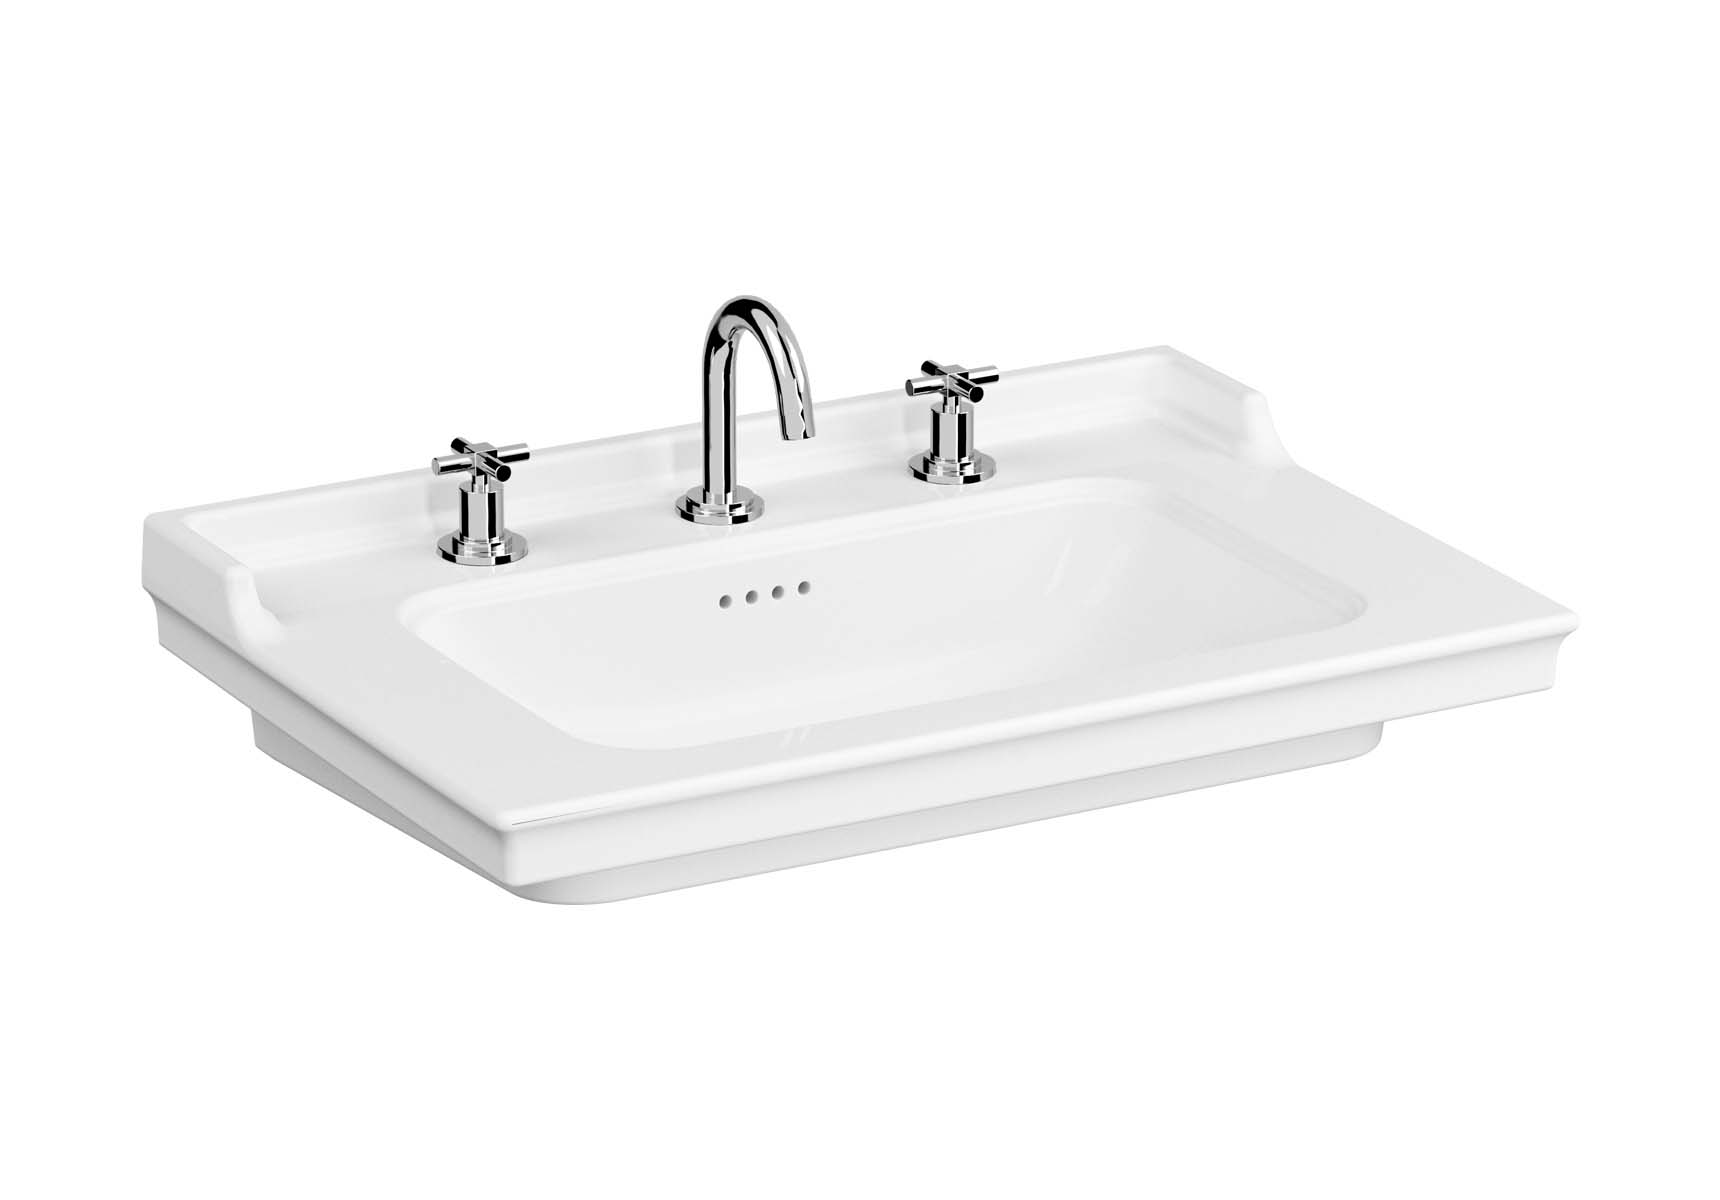 Vanity Basin, 80 cm, One Tap Hole, With Overflow Hole